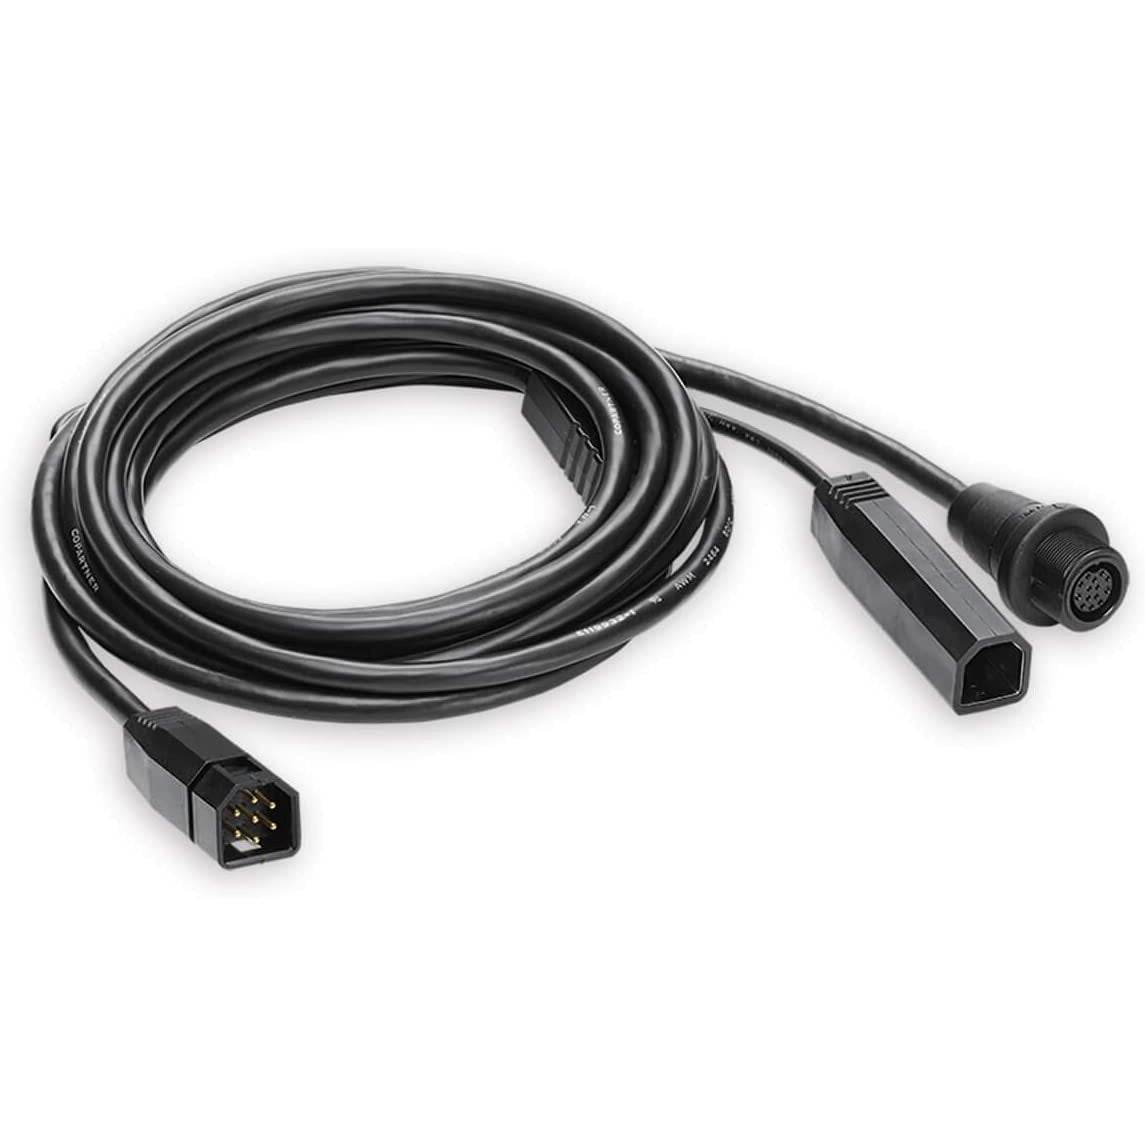 Humminbird EC M3 14W30 - 14 pin (30') transducer extension cable